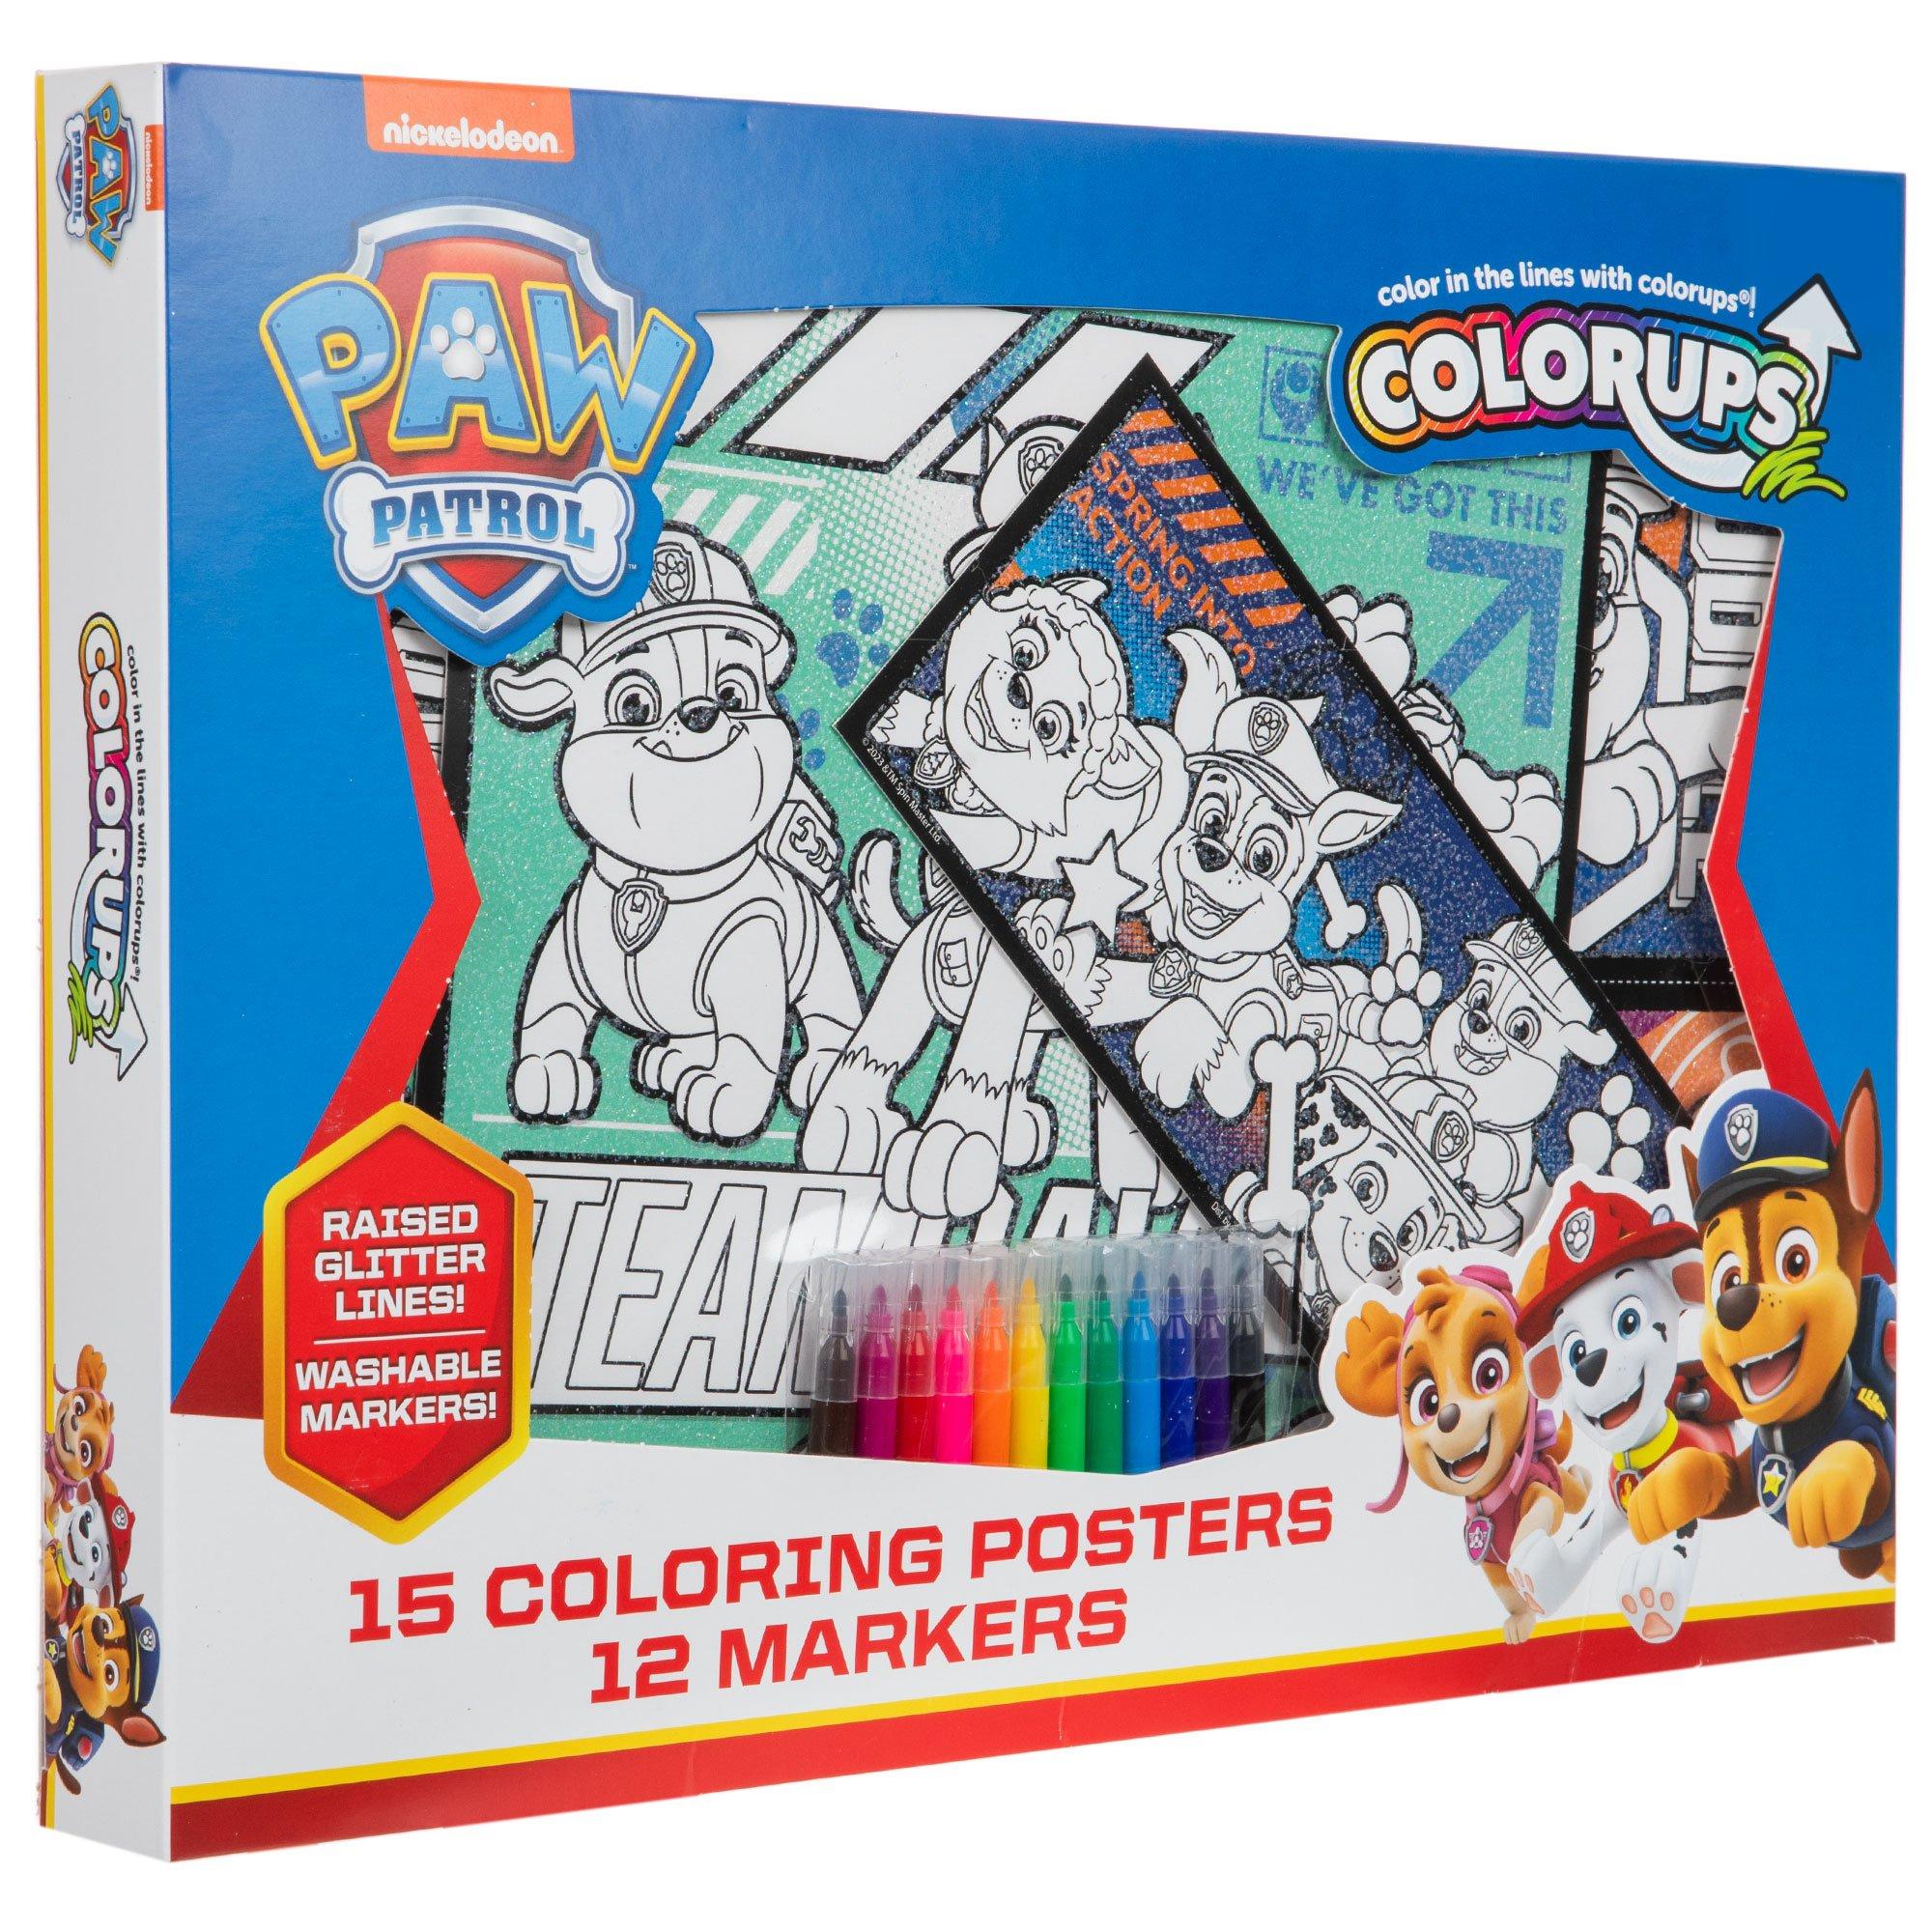 Paw Patrol Coloring Book - Champion Party Supply